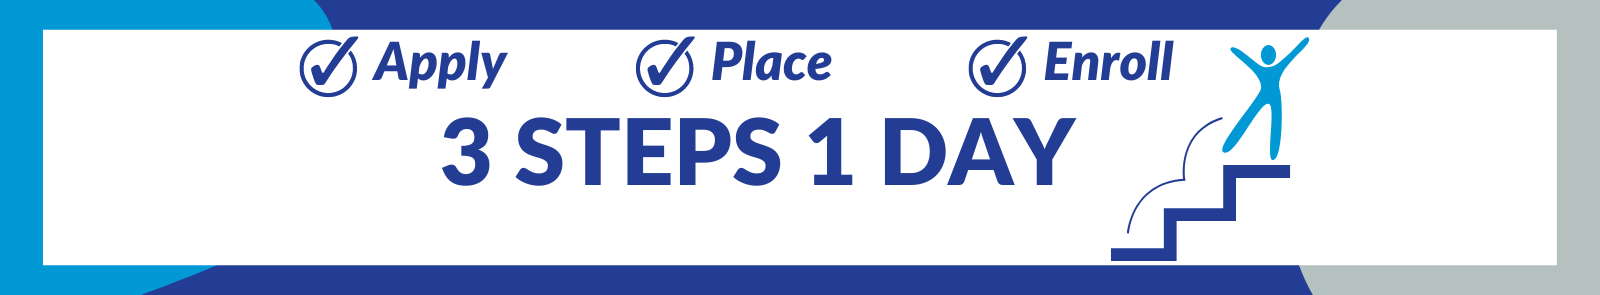 Apply, Place, Enroll - 3 Steps 1 Day